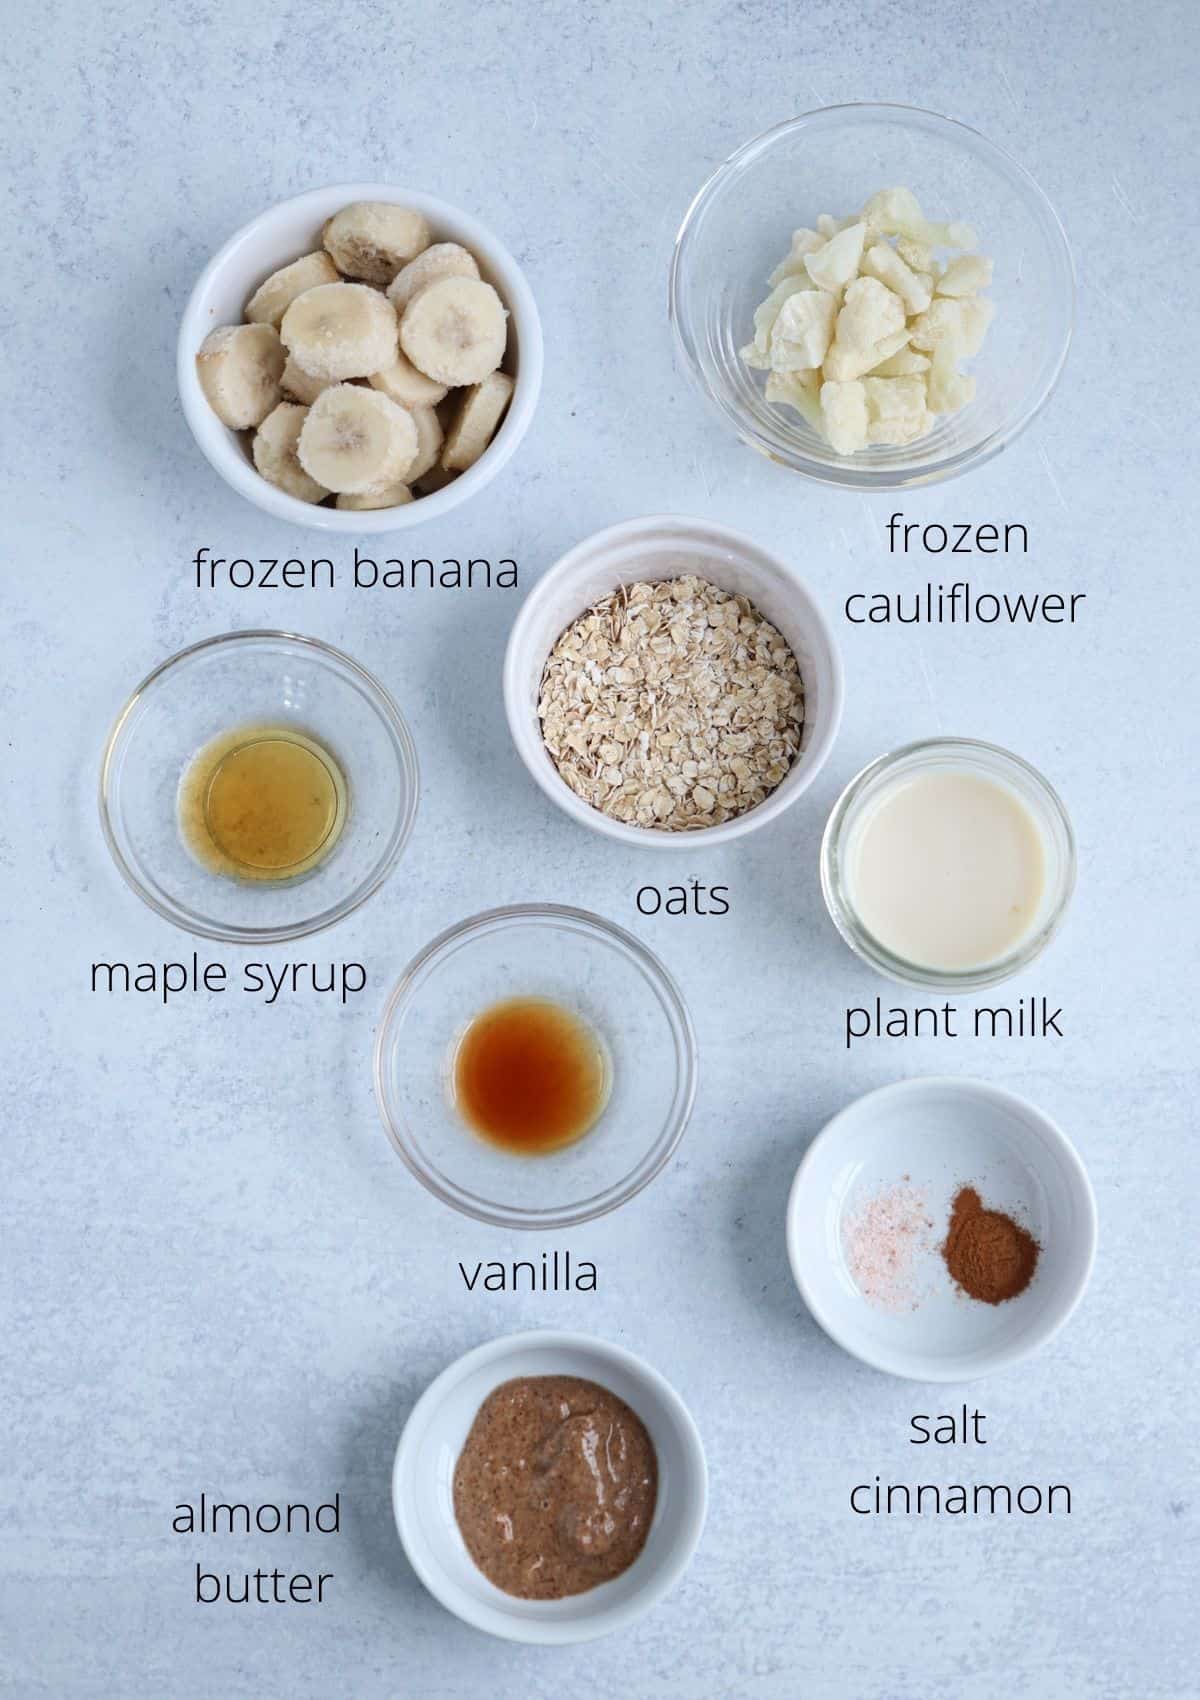 ingredients for making an oatmeal smoothie bowl in small bowls with captions.